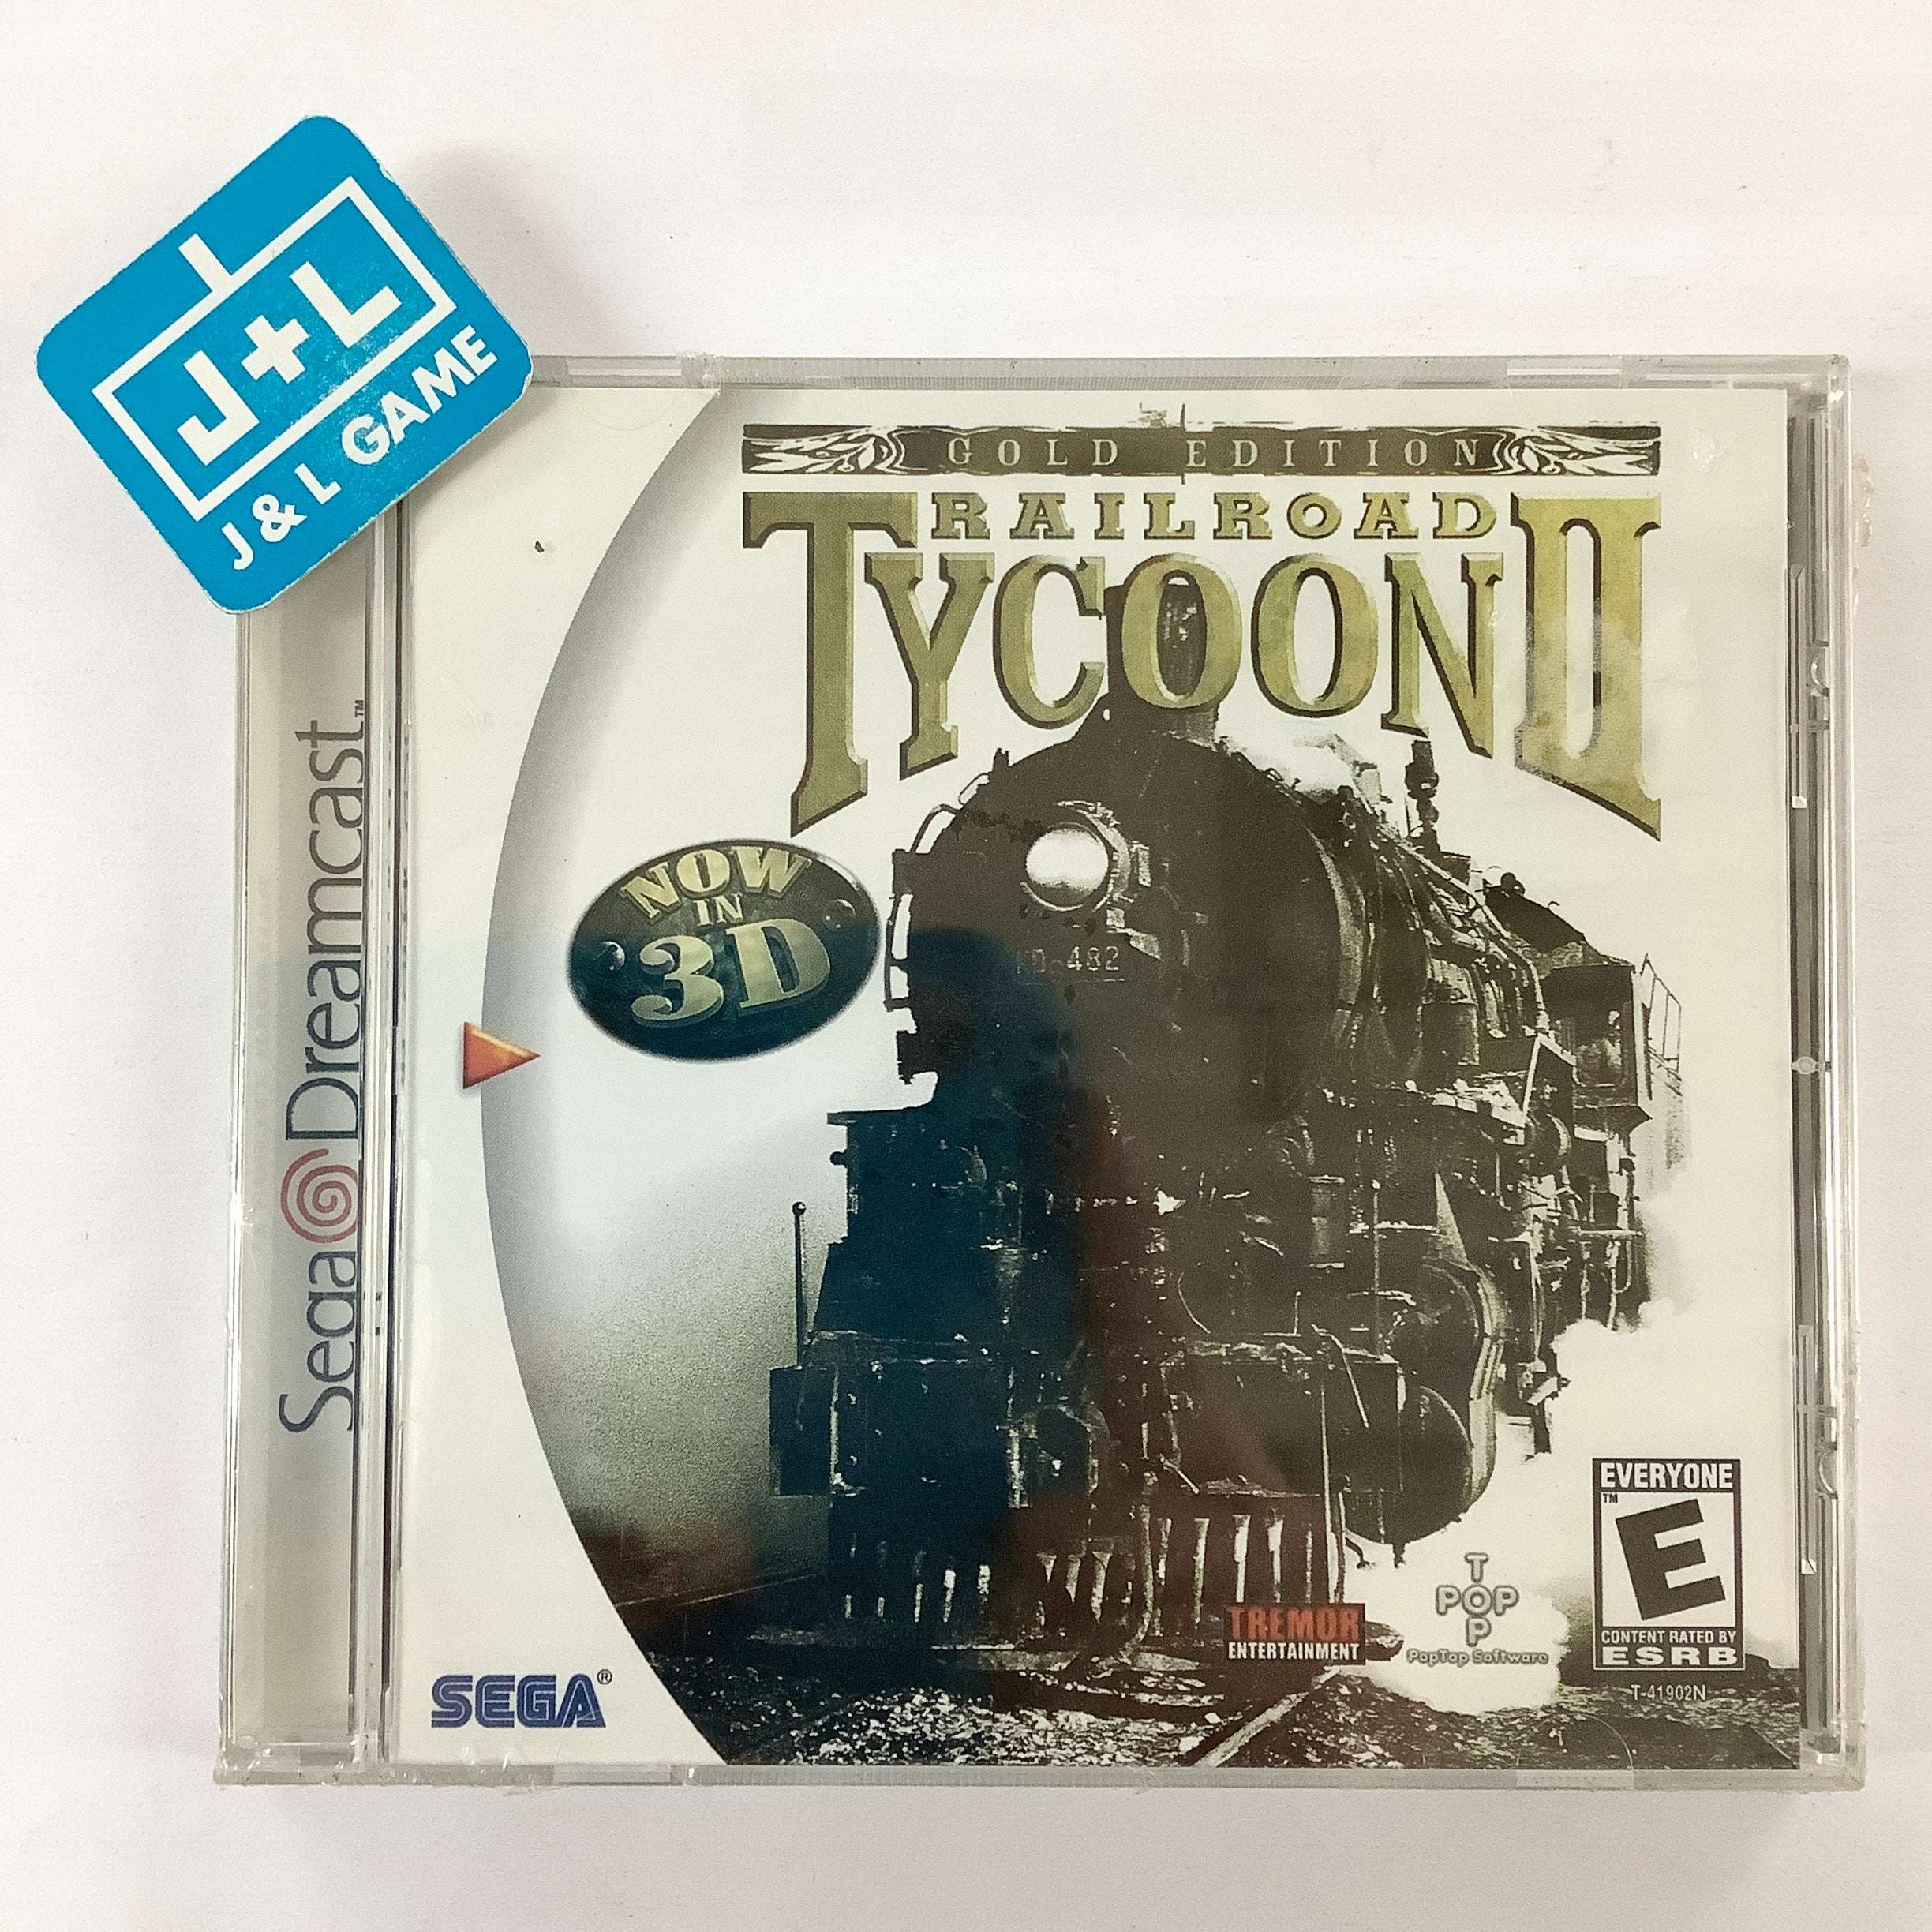 Railroad Tycoon II: Gold Edition - (DC) SEGA Dreamcast Video Games Gathering   